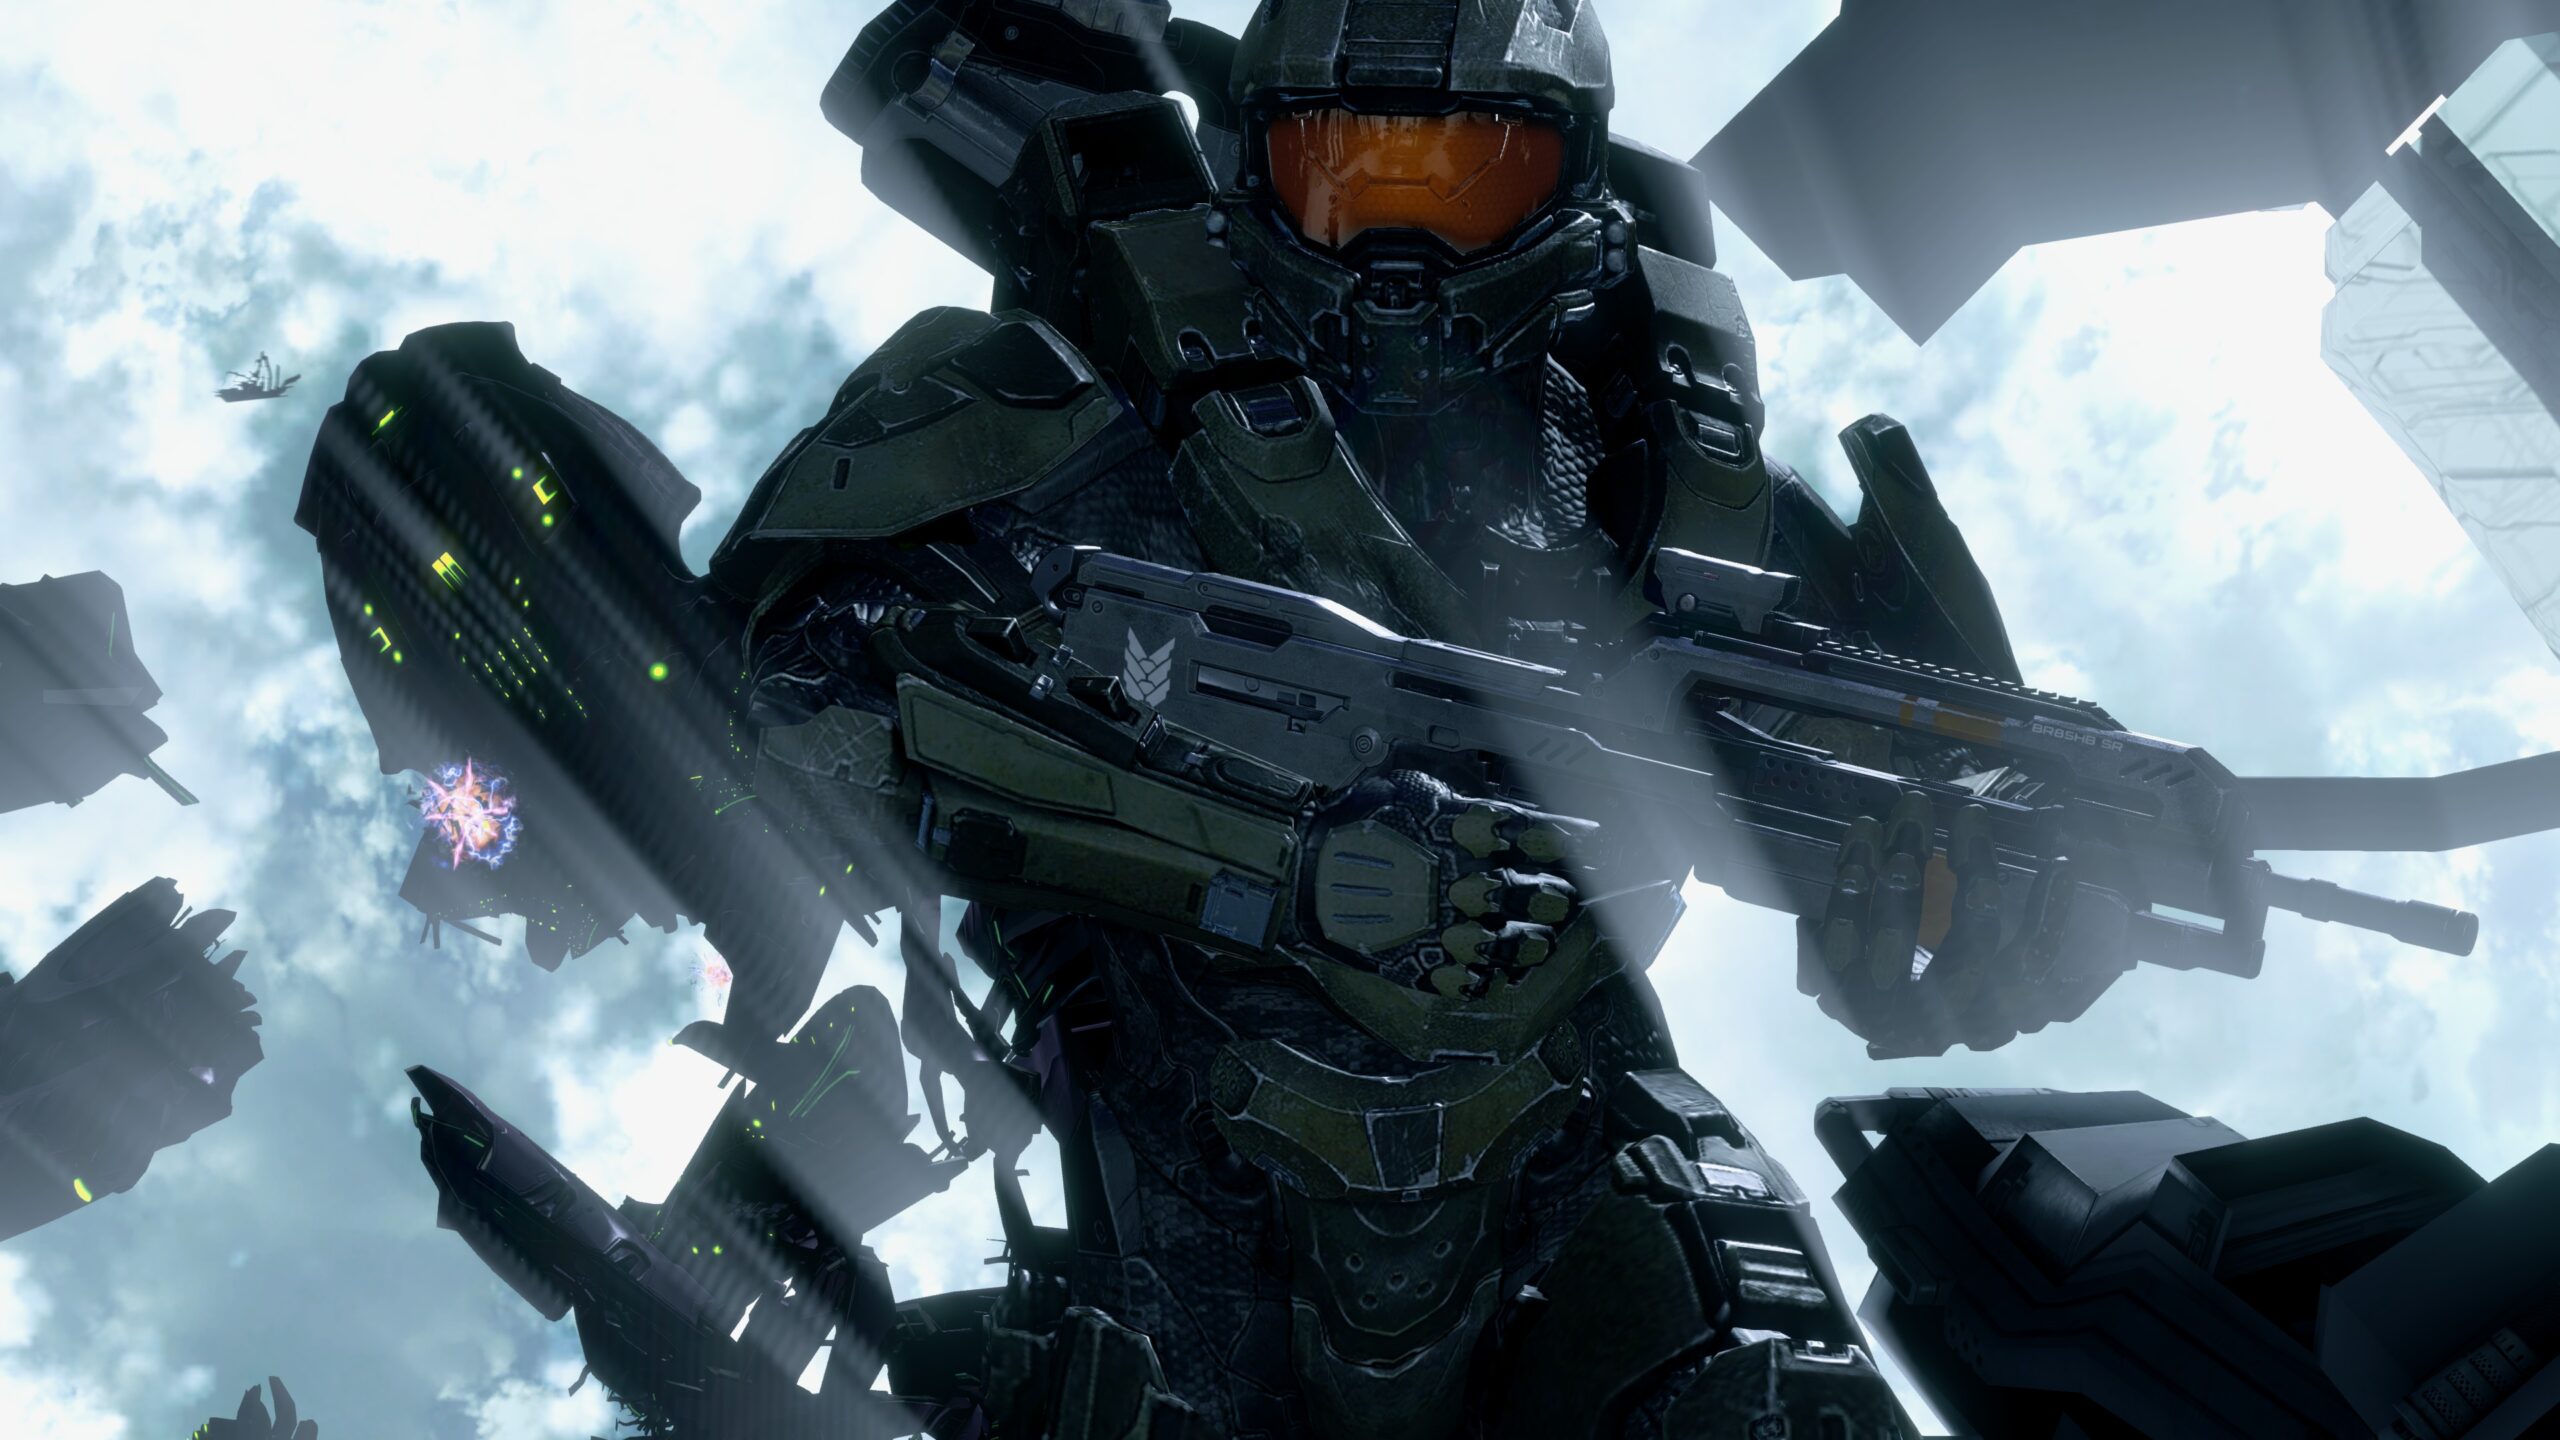 Halo 4 in-game screenshot of the Master Chief on the outer hull of the UNSC Forward Unto Dawn